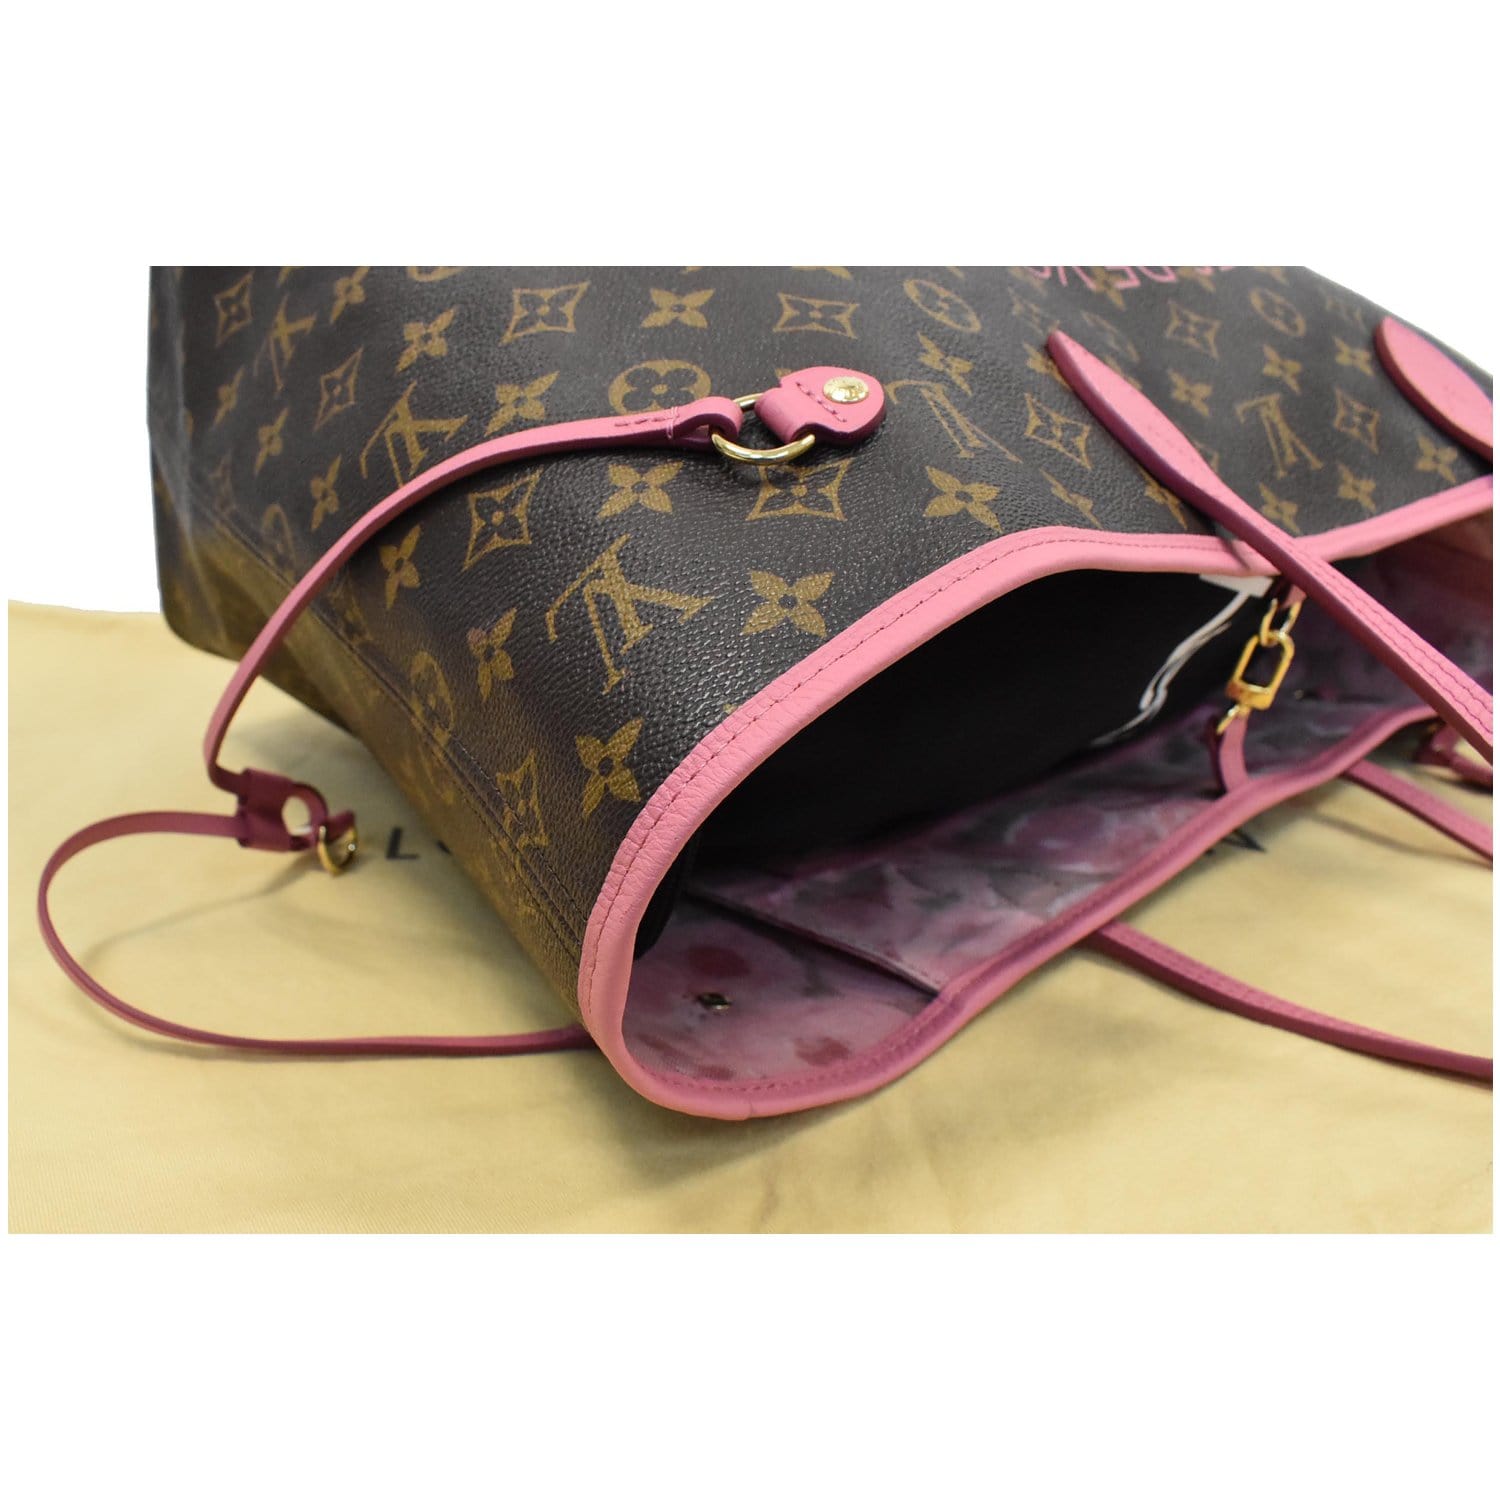 neverfull limited editions